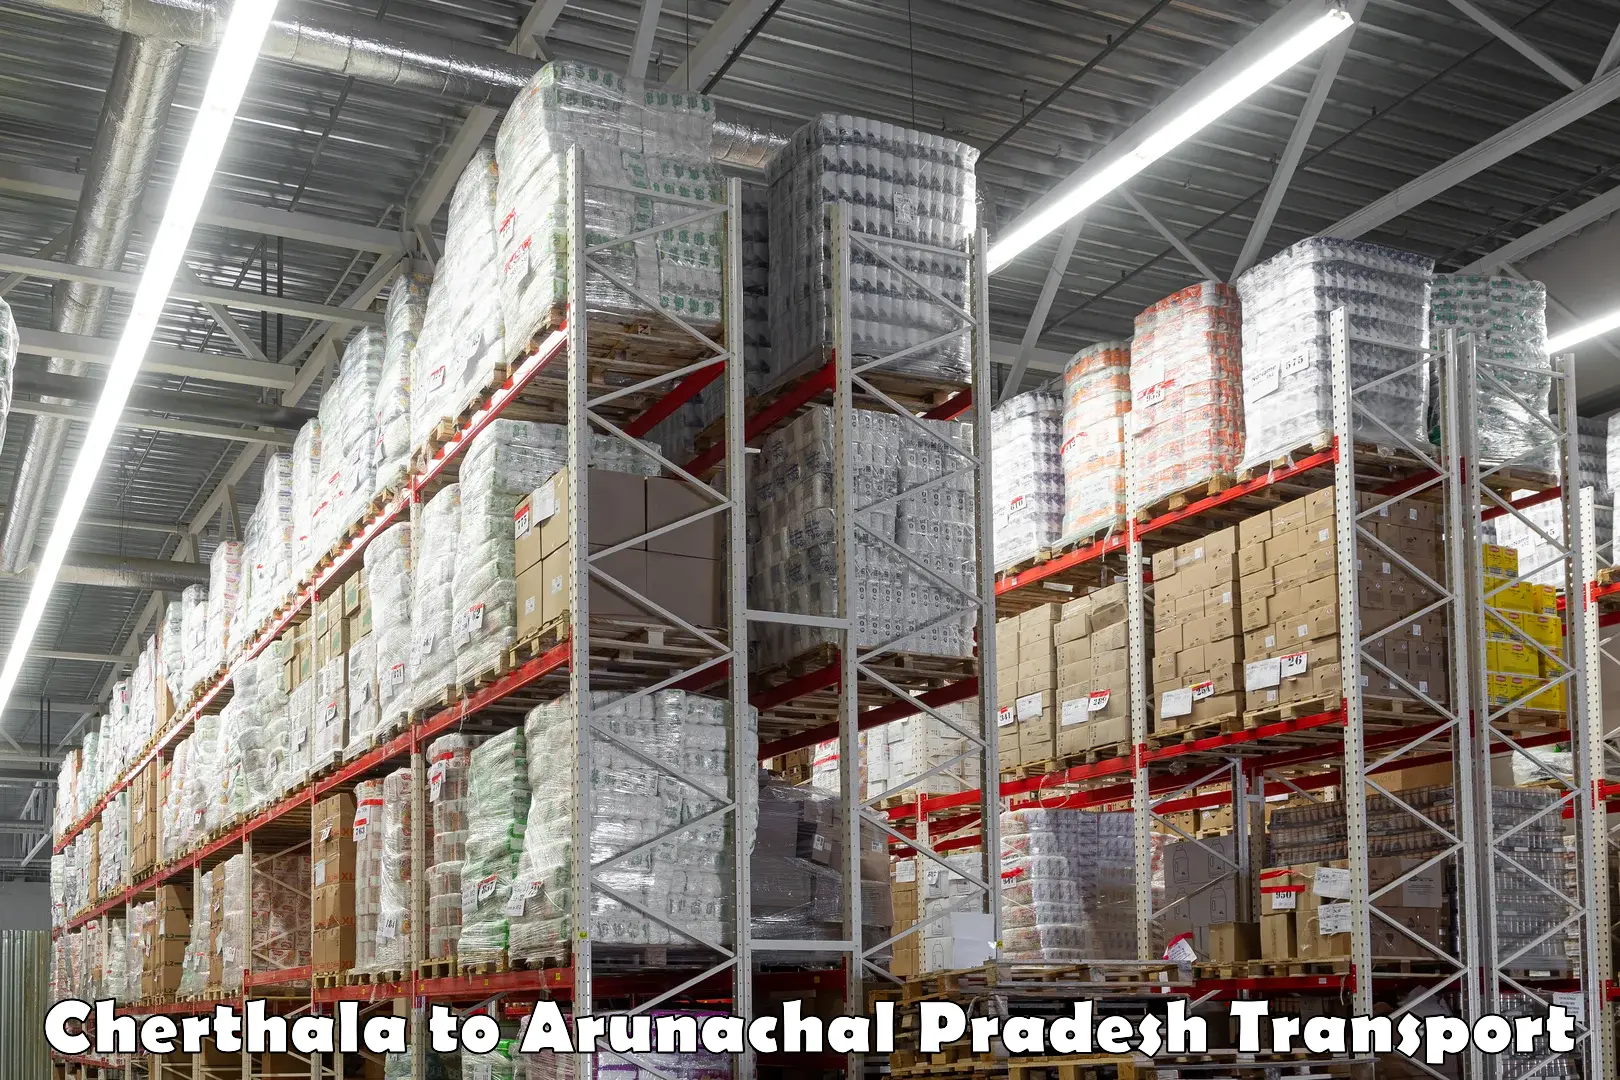 Truck transport companies in India Cherthala to Aalo